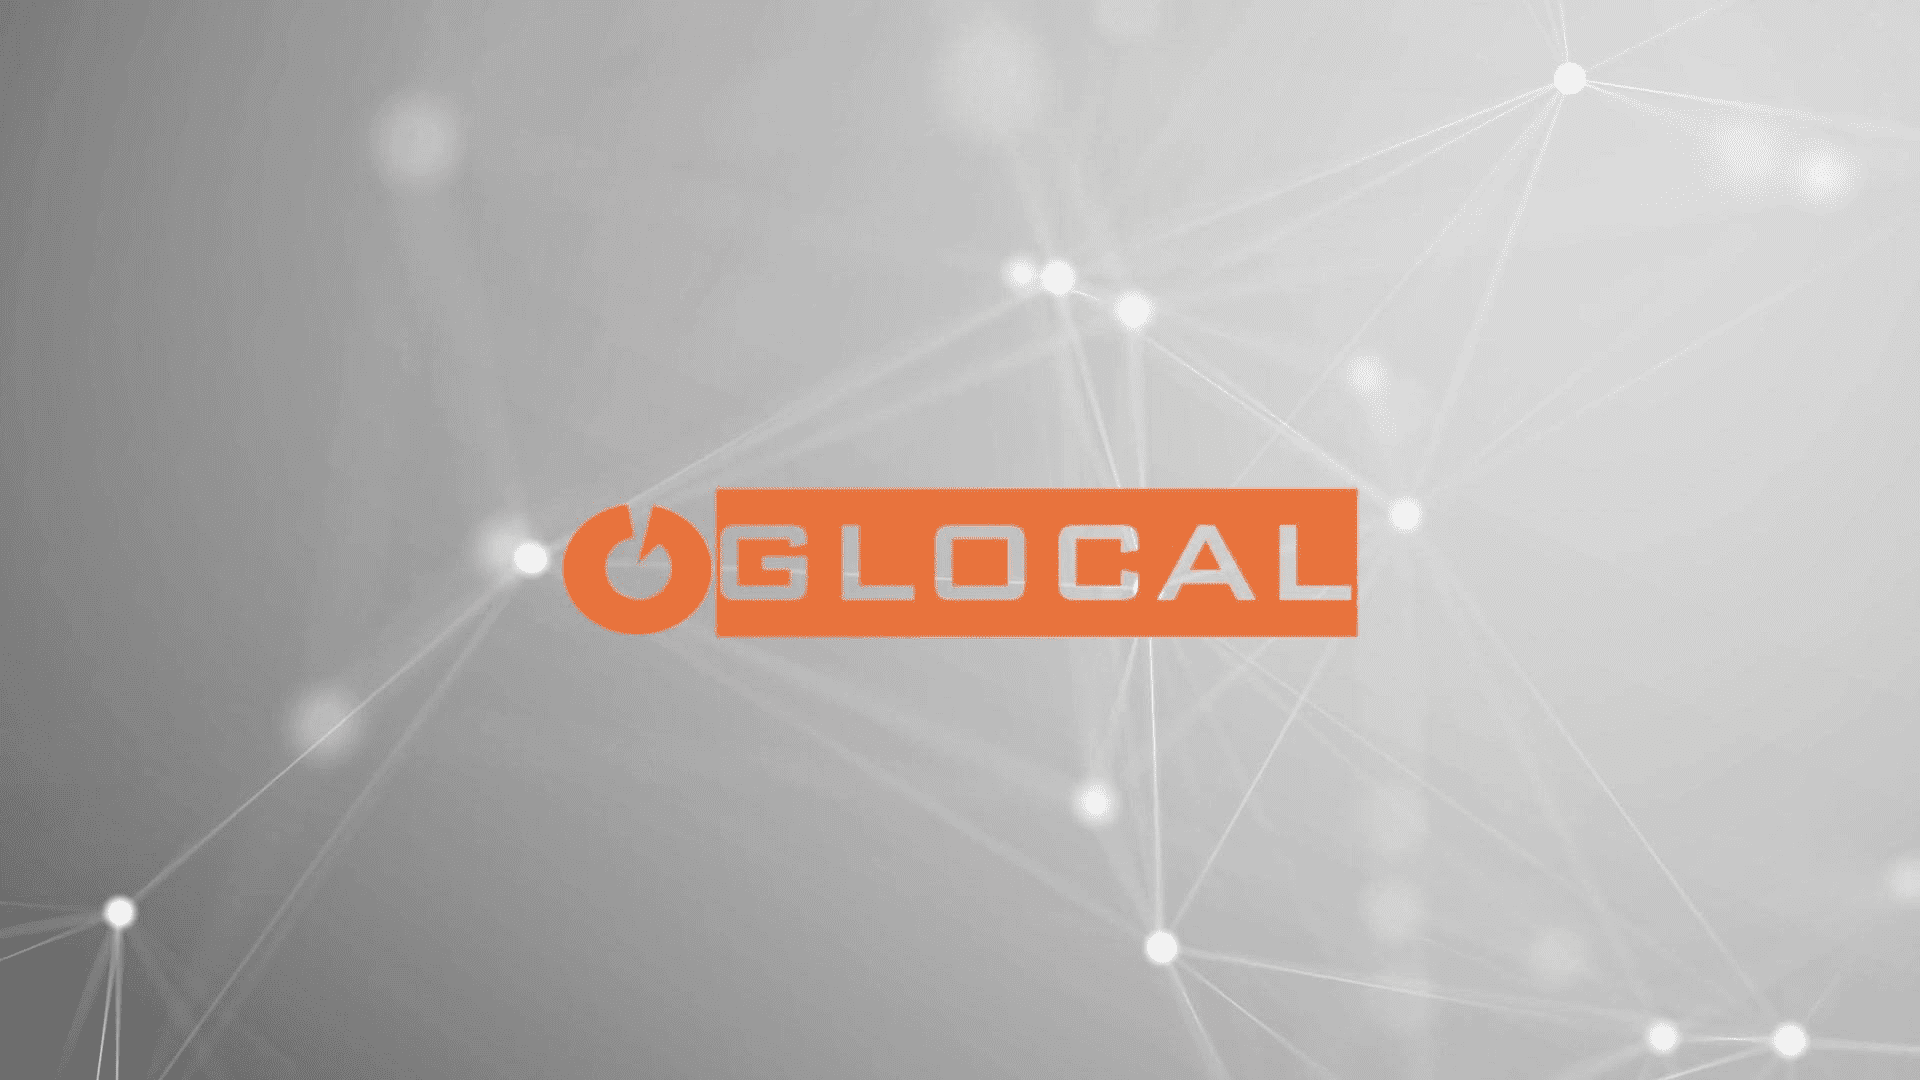 glocal private limited website logo with background of dots